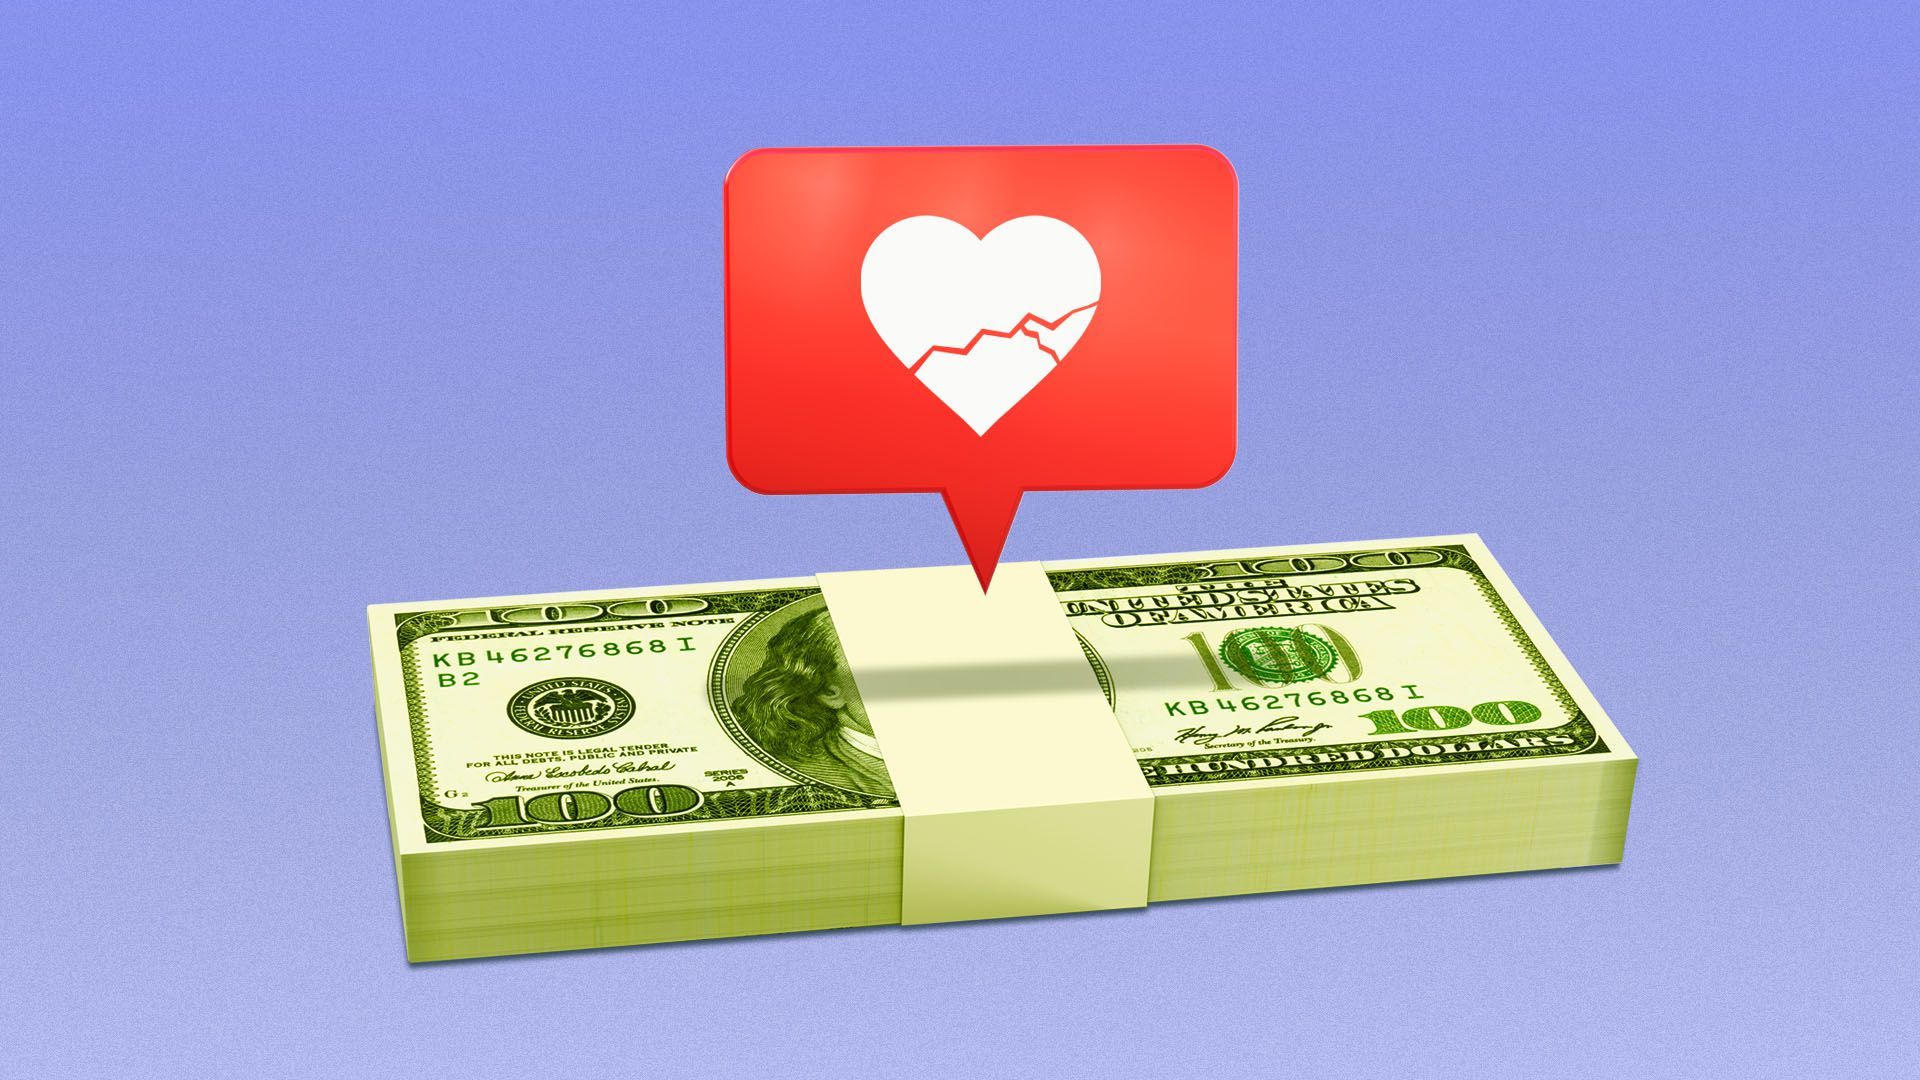 Illustration of a stack of money with a broken heart emoji floating over it